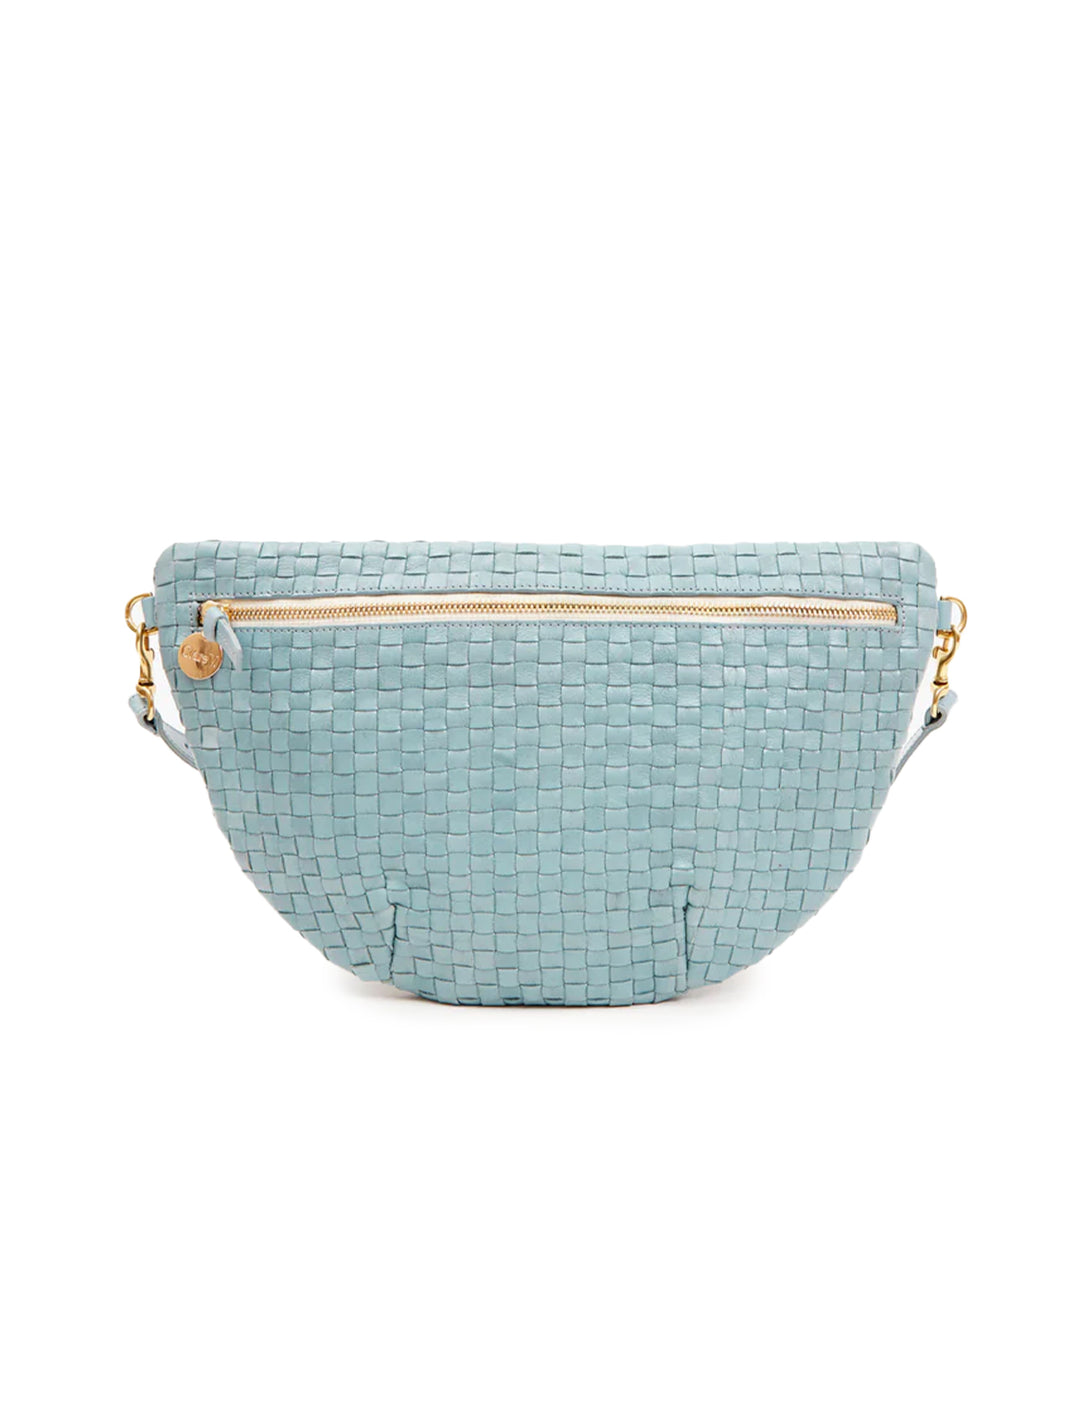 Front view of Clare V.'s grande fanny in sunbleached sky blue woven.